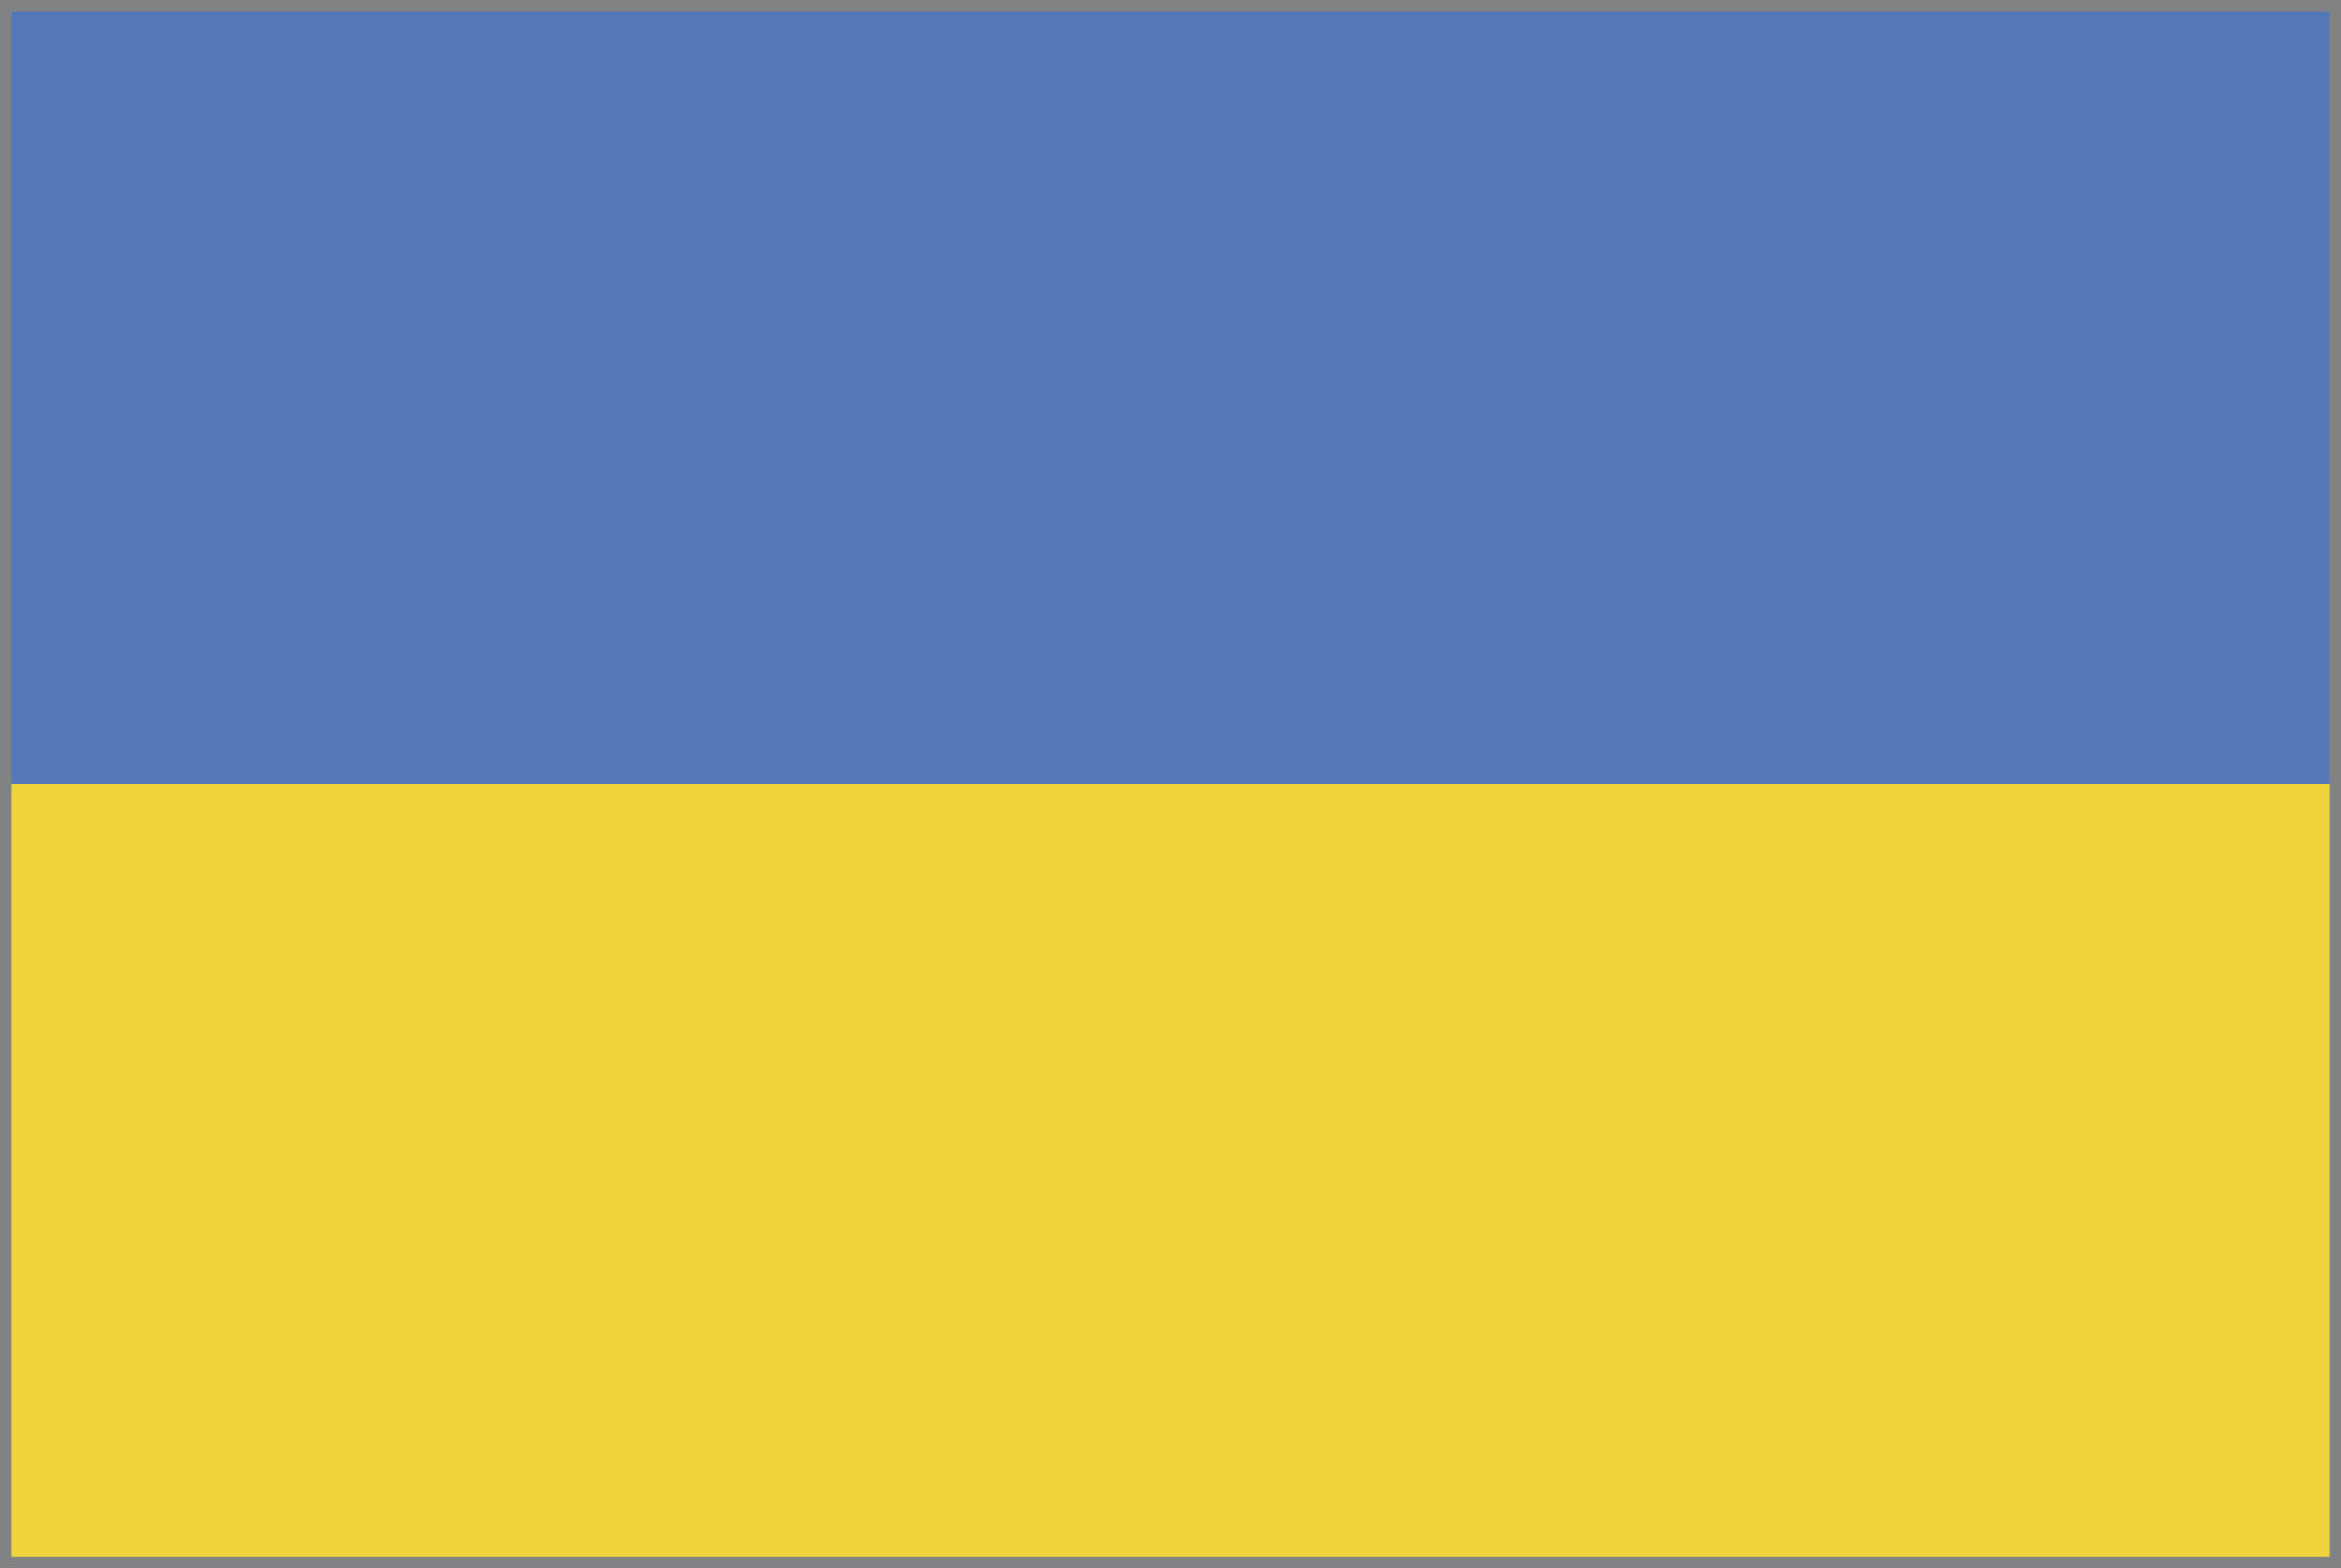 The flag of Ukraine. (Getty Images)